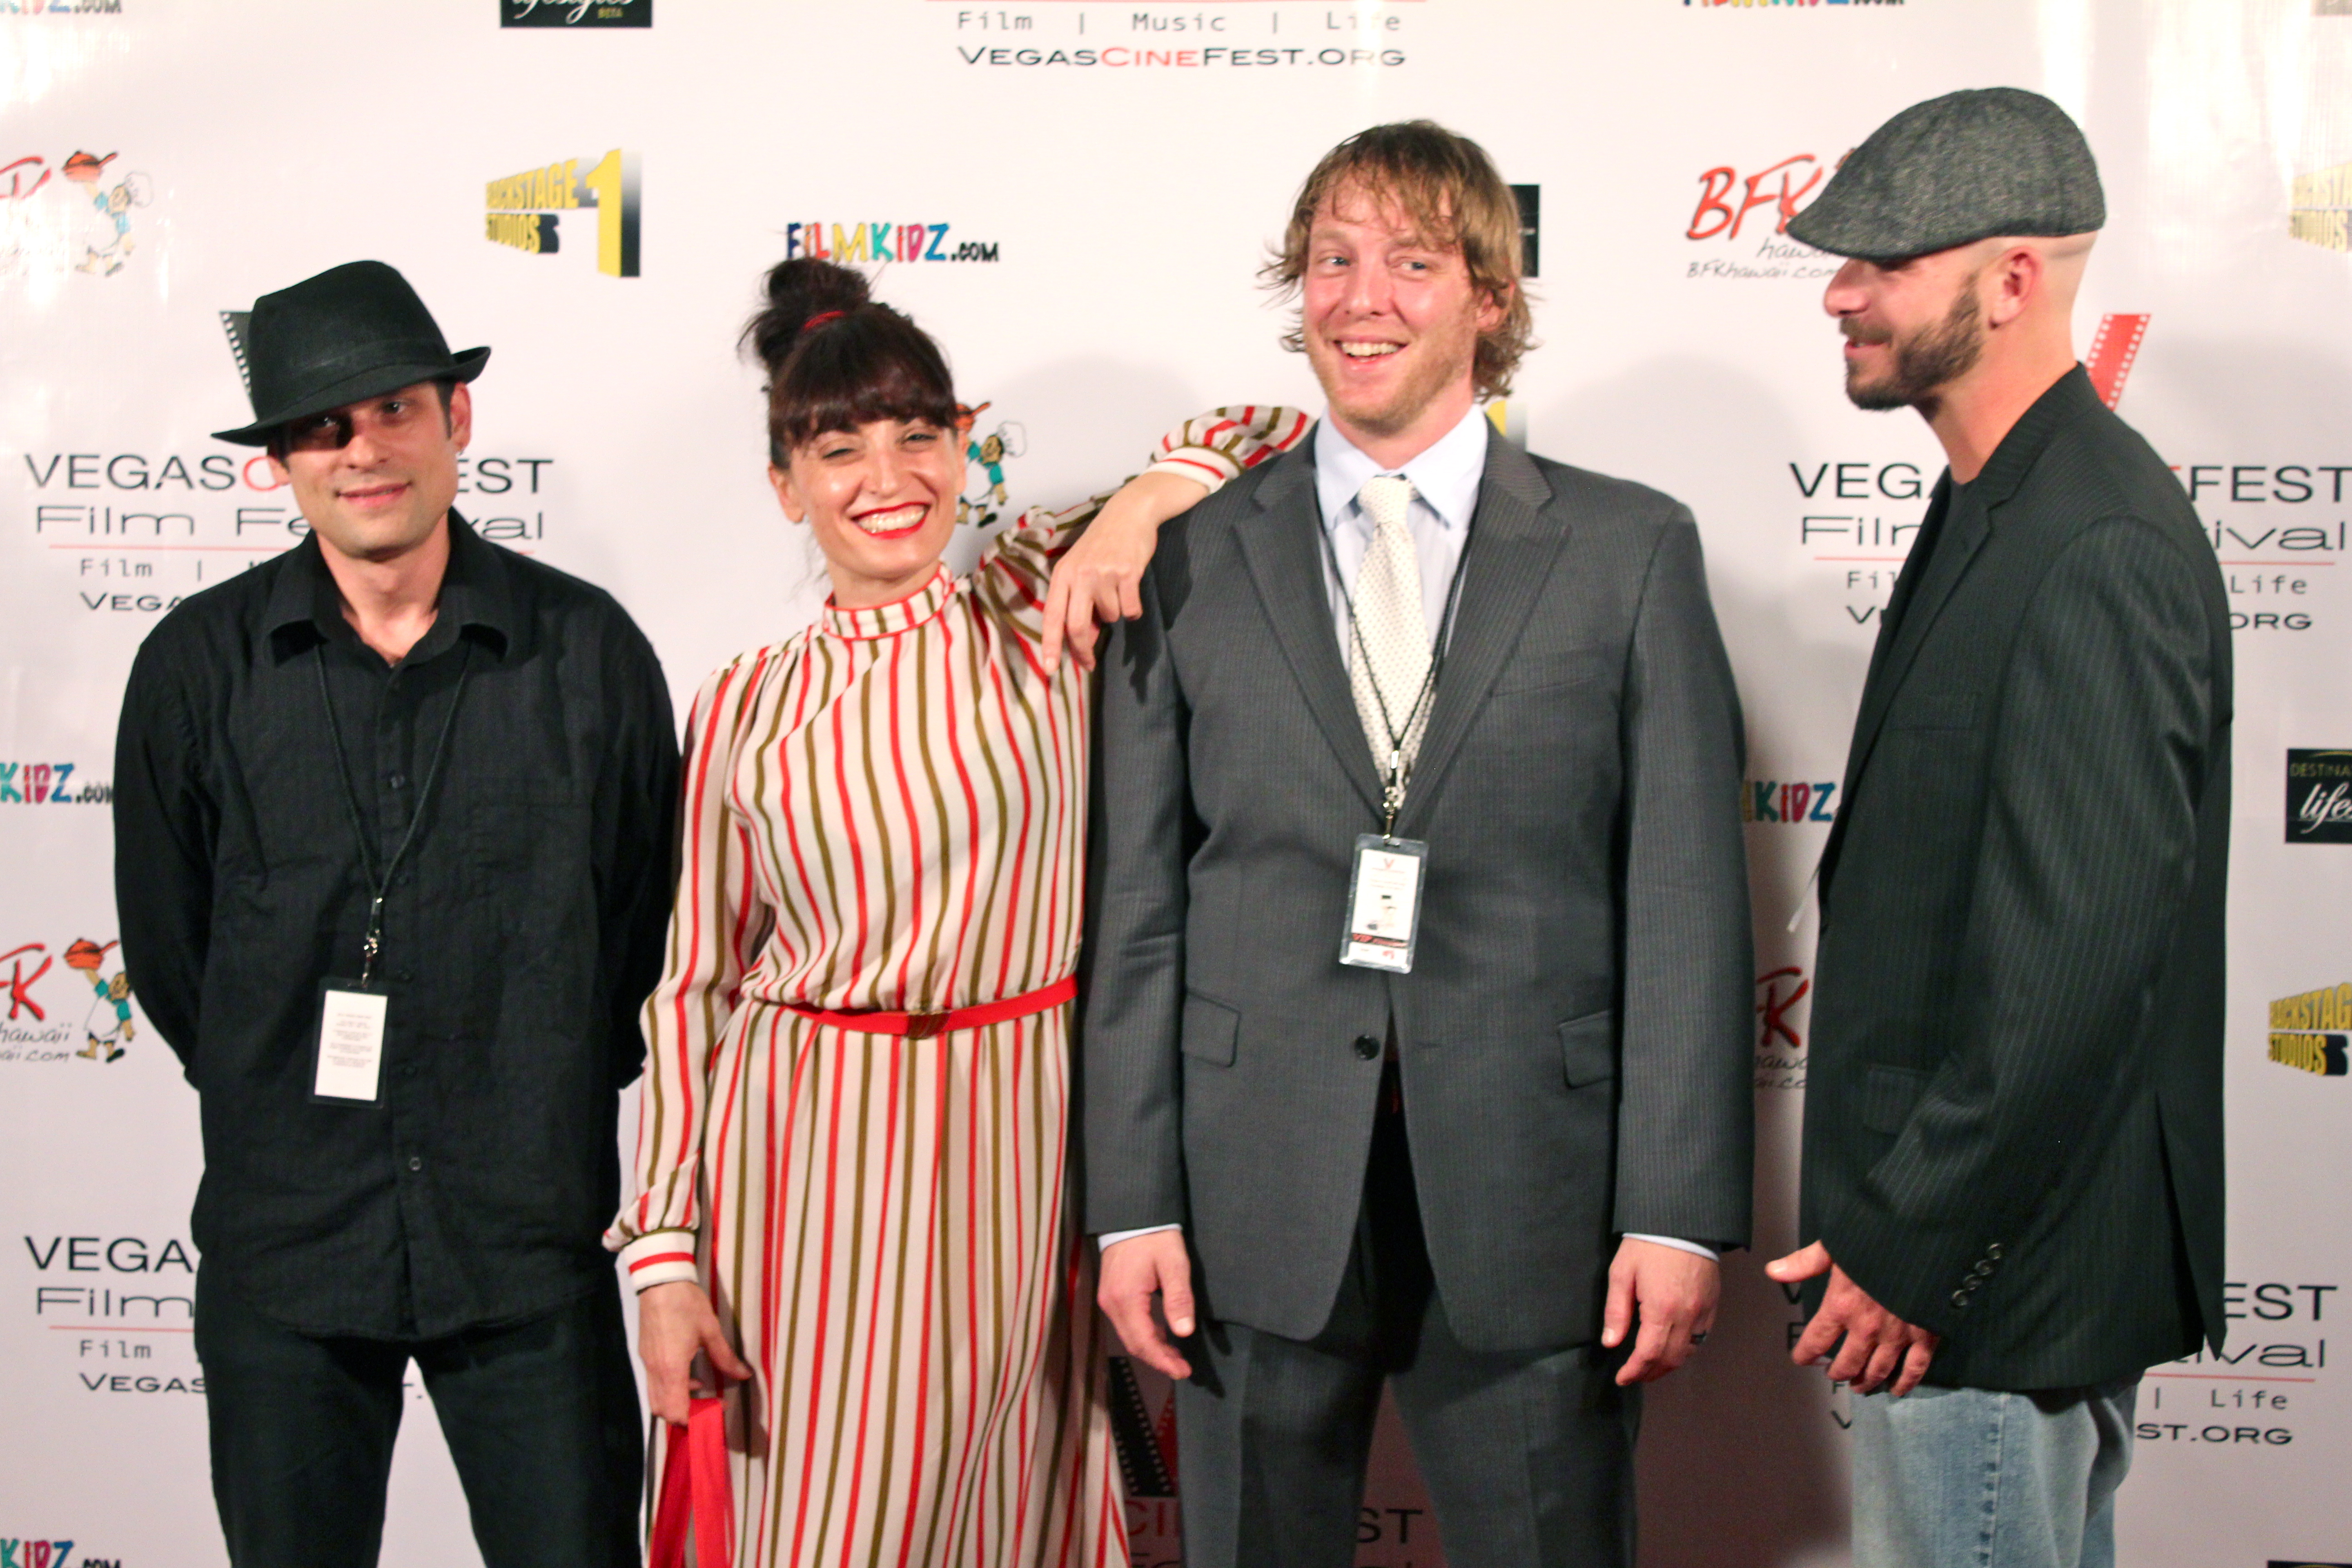 Vegas Cine Fest 2012_awards ceremony night with the competitors